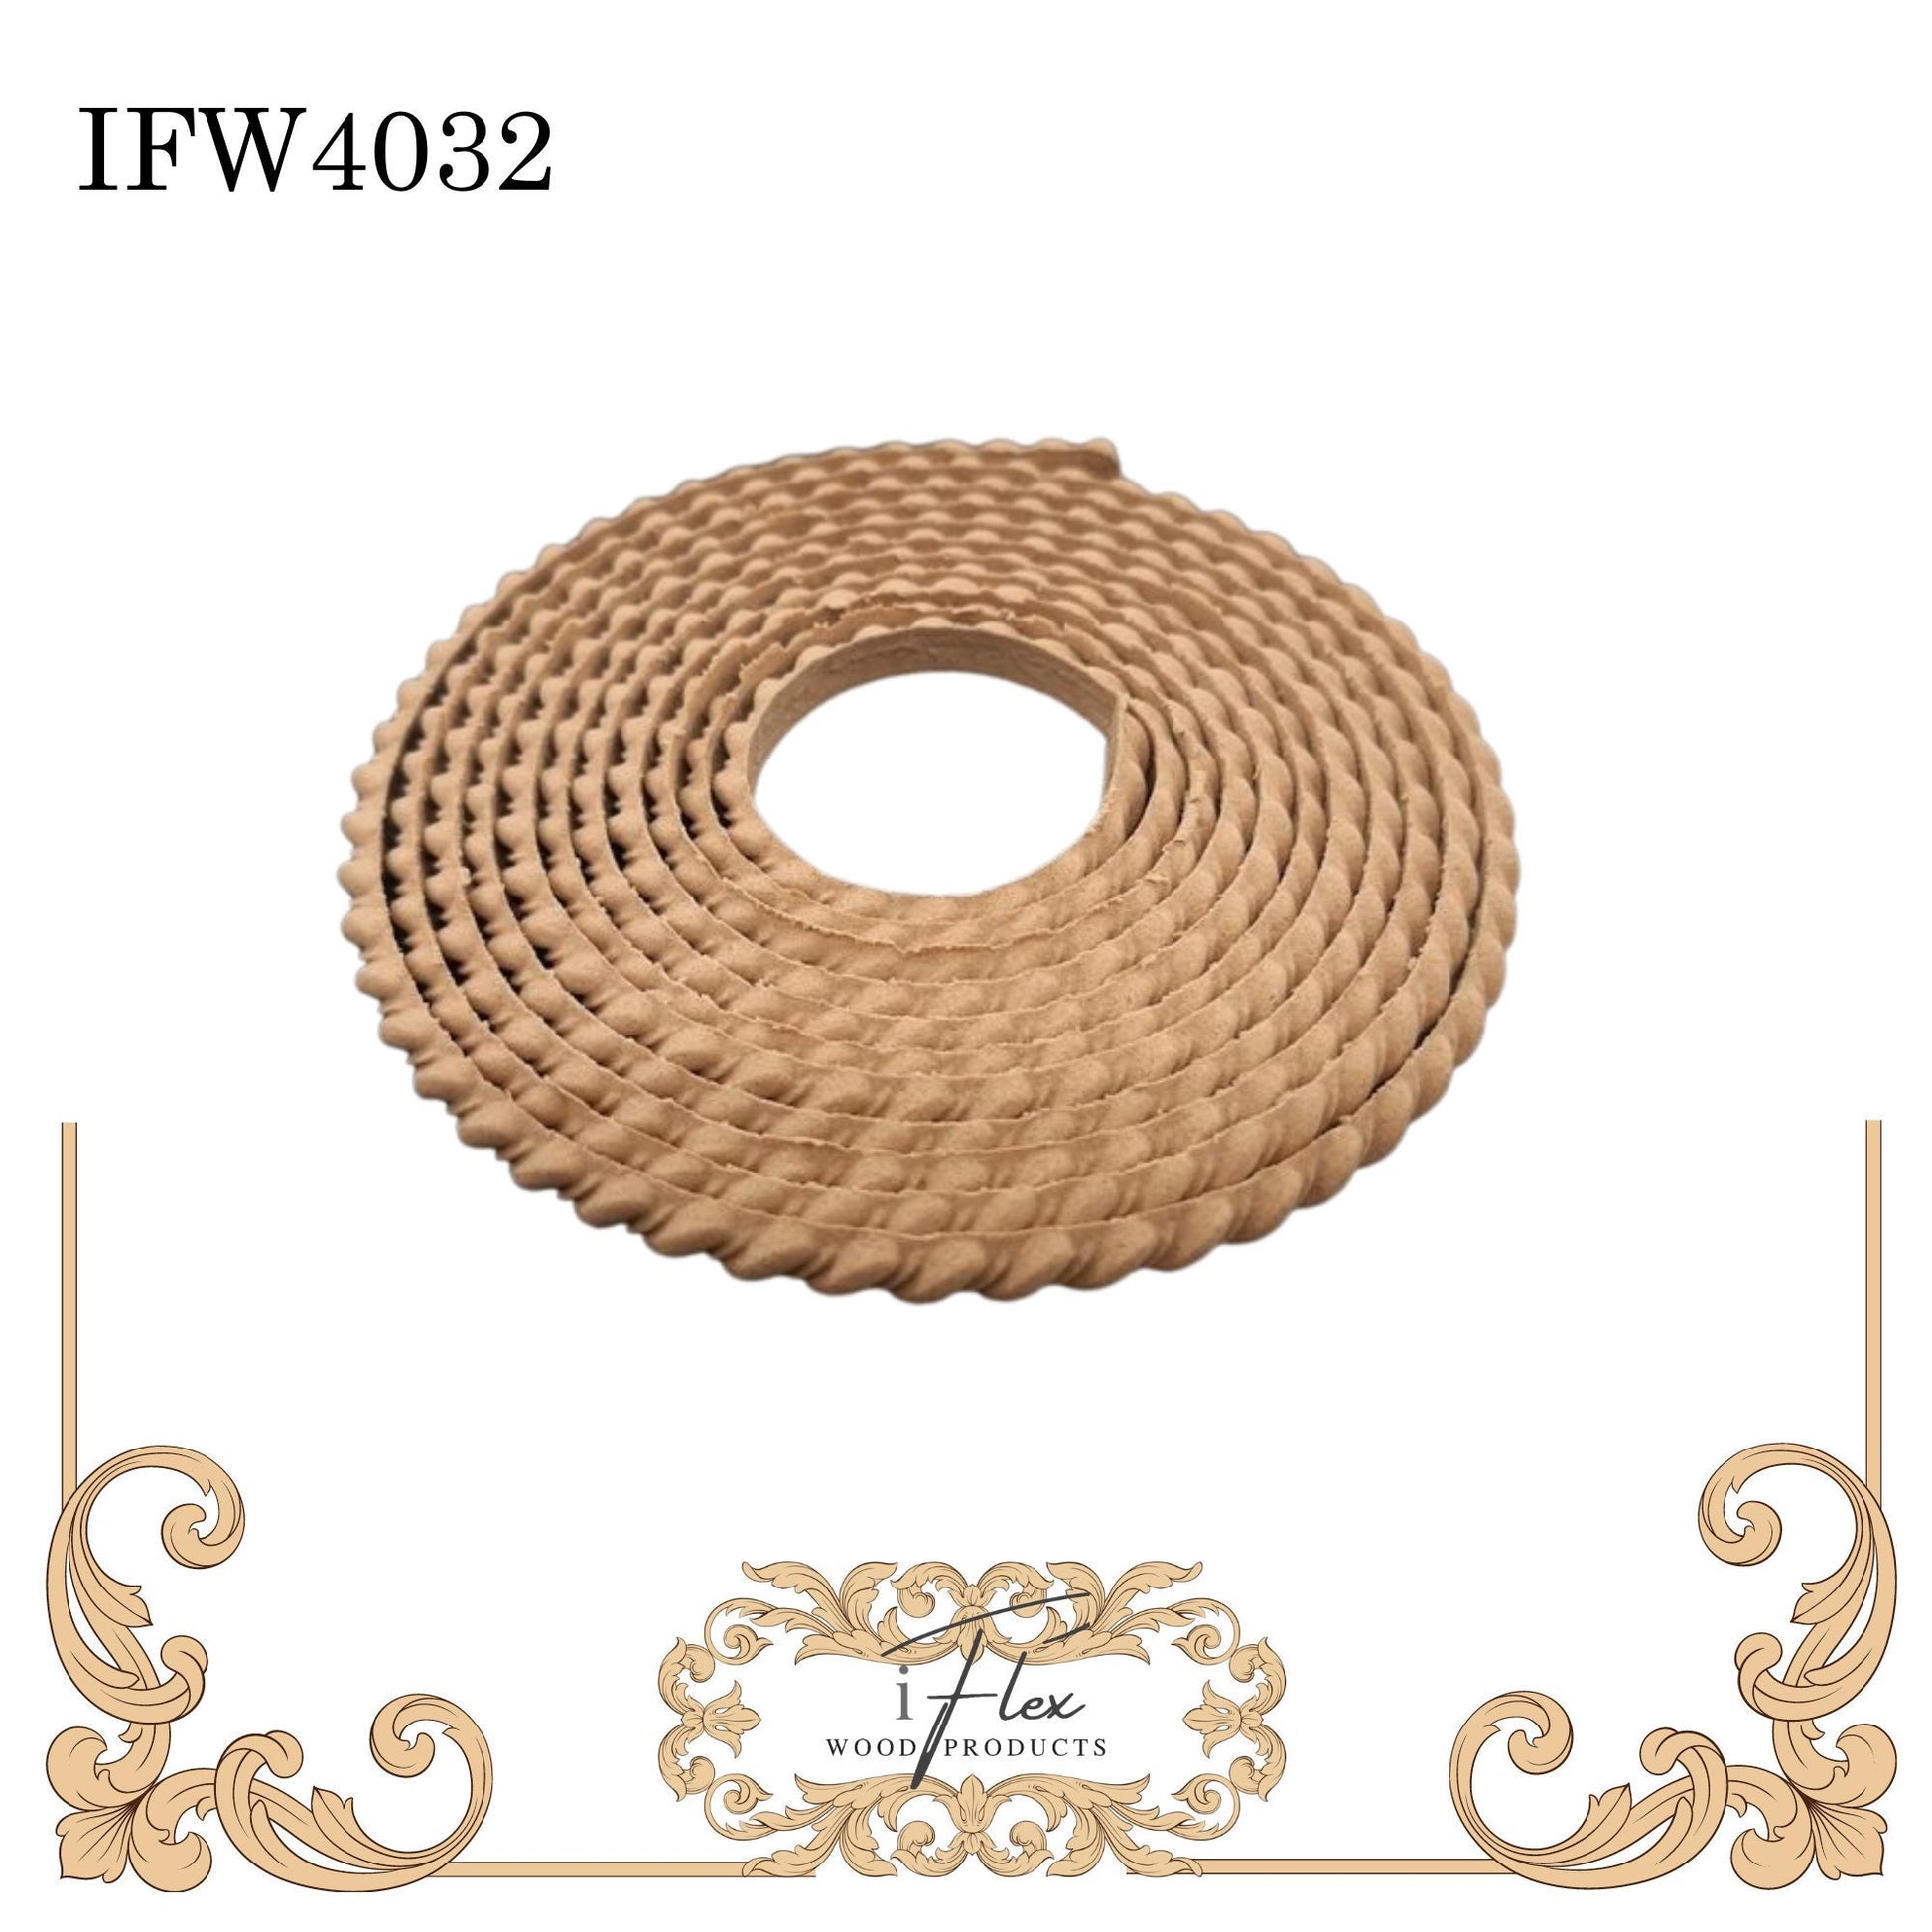 IFW 4032 iFlex Wood Products, bendable mouldings, flexible, wooden appliques, trim